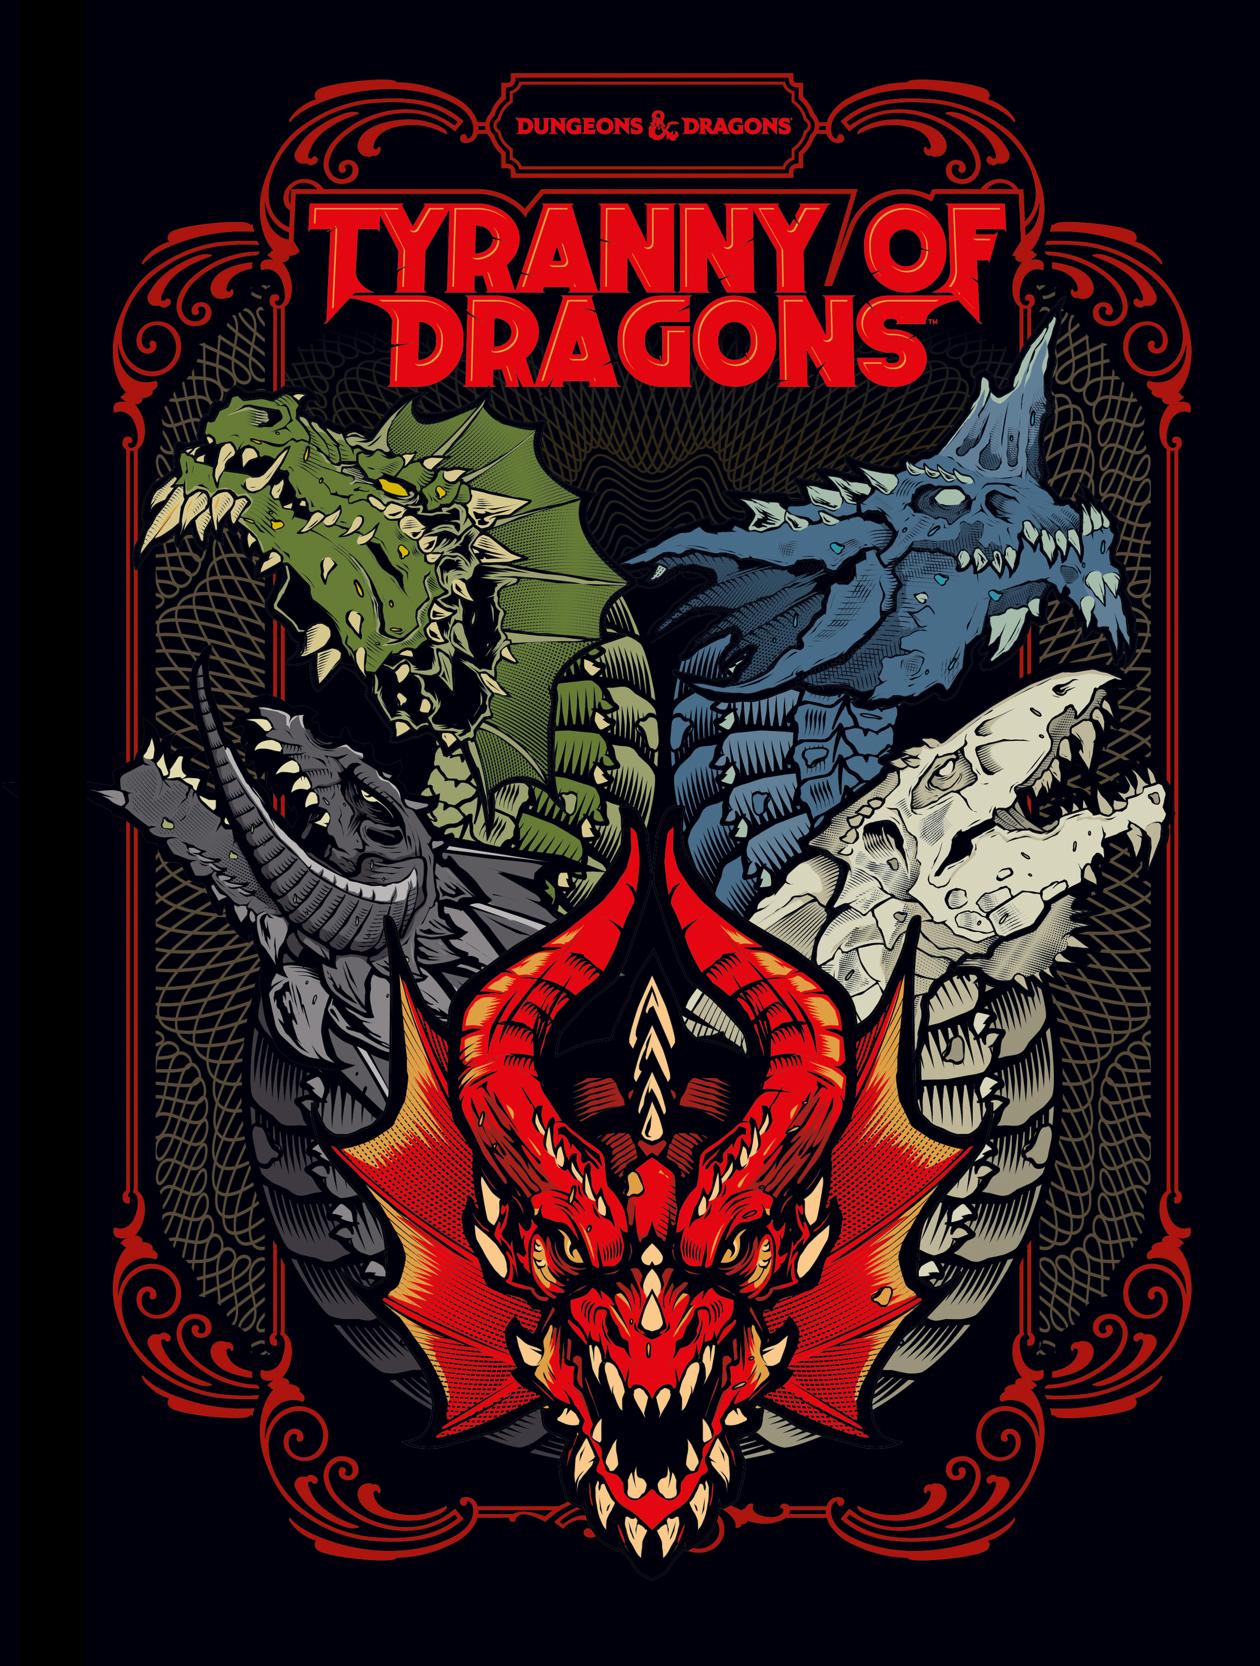 Tyranny of Dragons (D&D Adventure Book Combines Hoard of the Dragon Queen + the Rise of Tiamat)